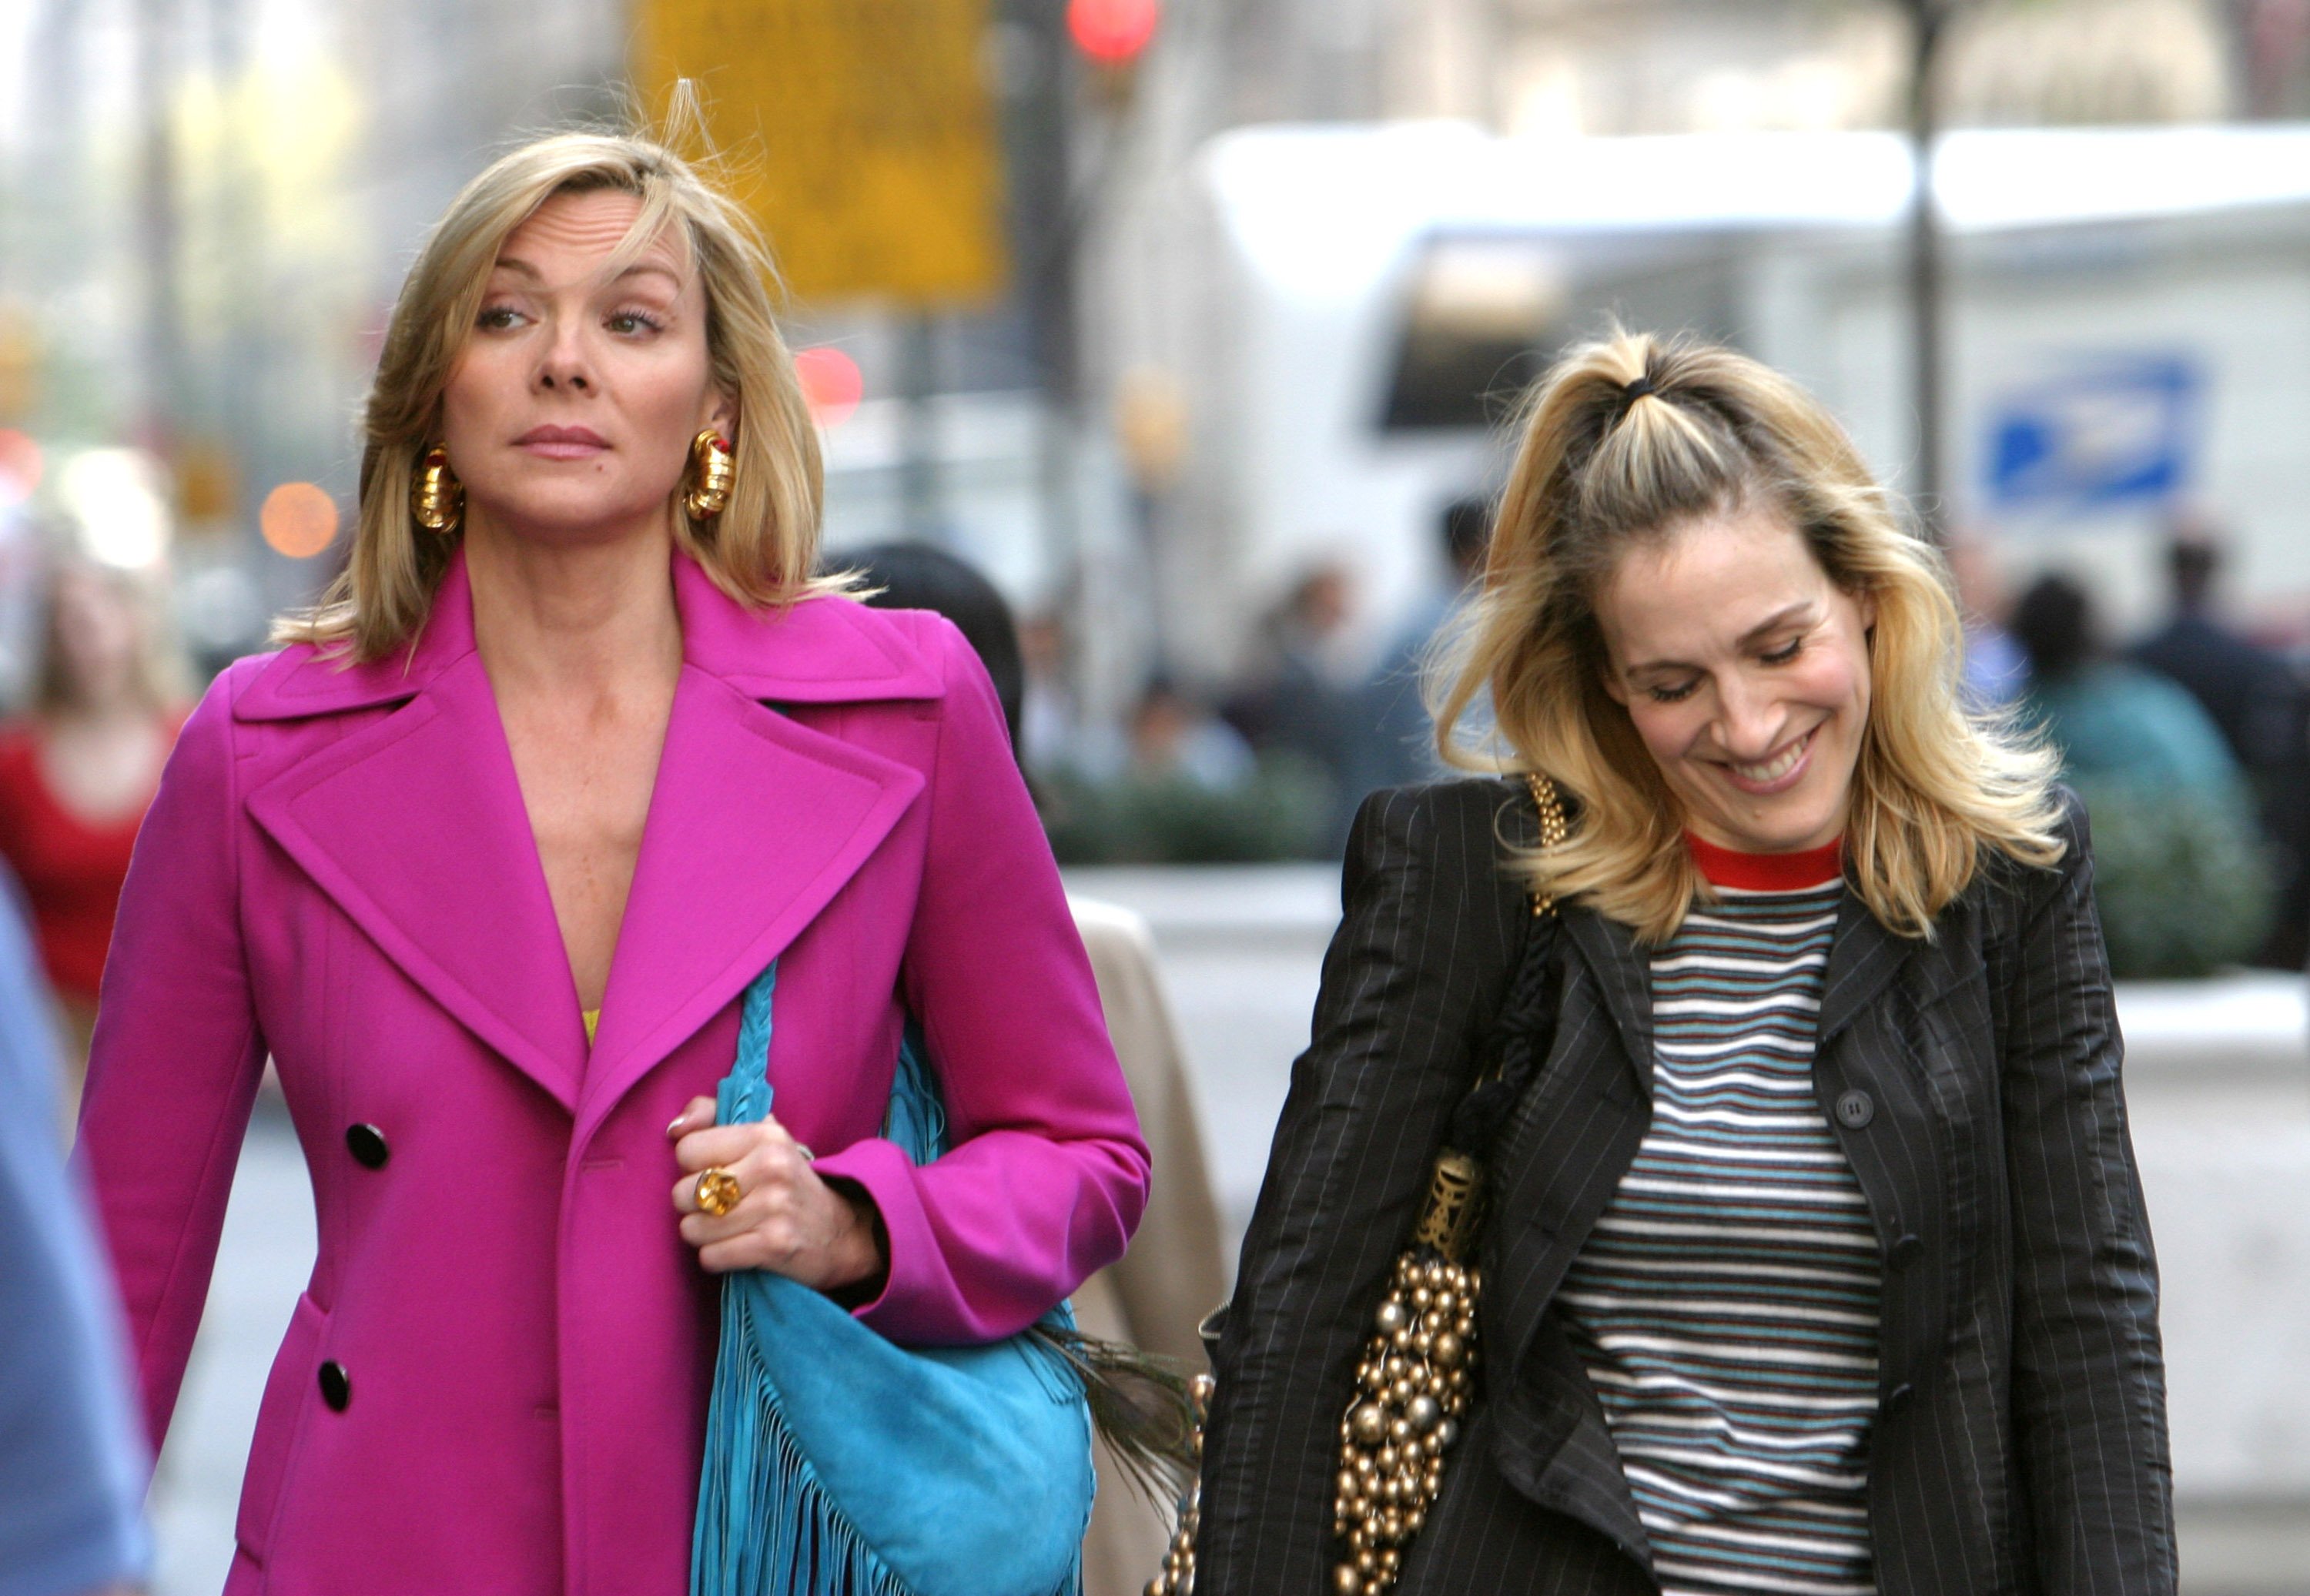 Kim Cattrall and Sarah Jessica Parker during Kim Cattrall and Sarah Jessica Parker On Location For "Sex And The City" in New York, New York. | Source: Getty Images. 